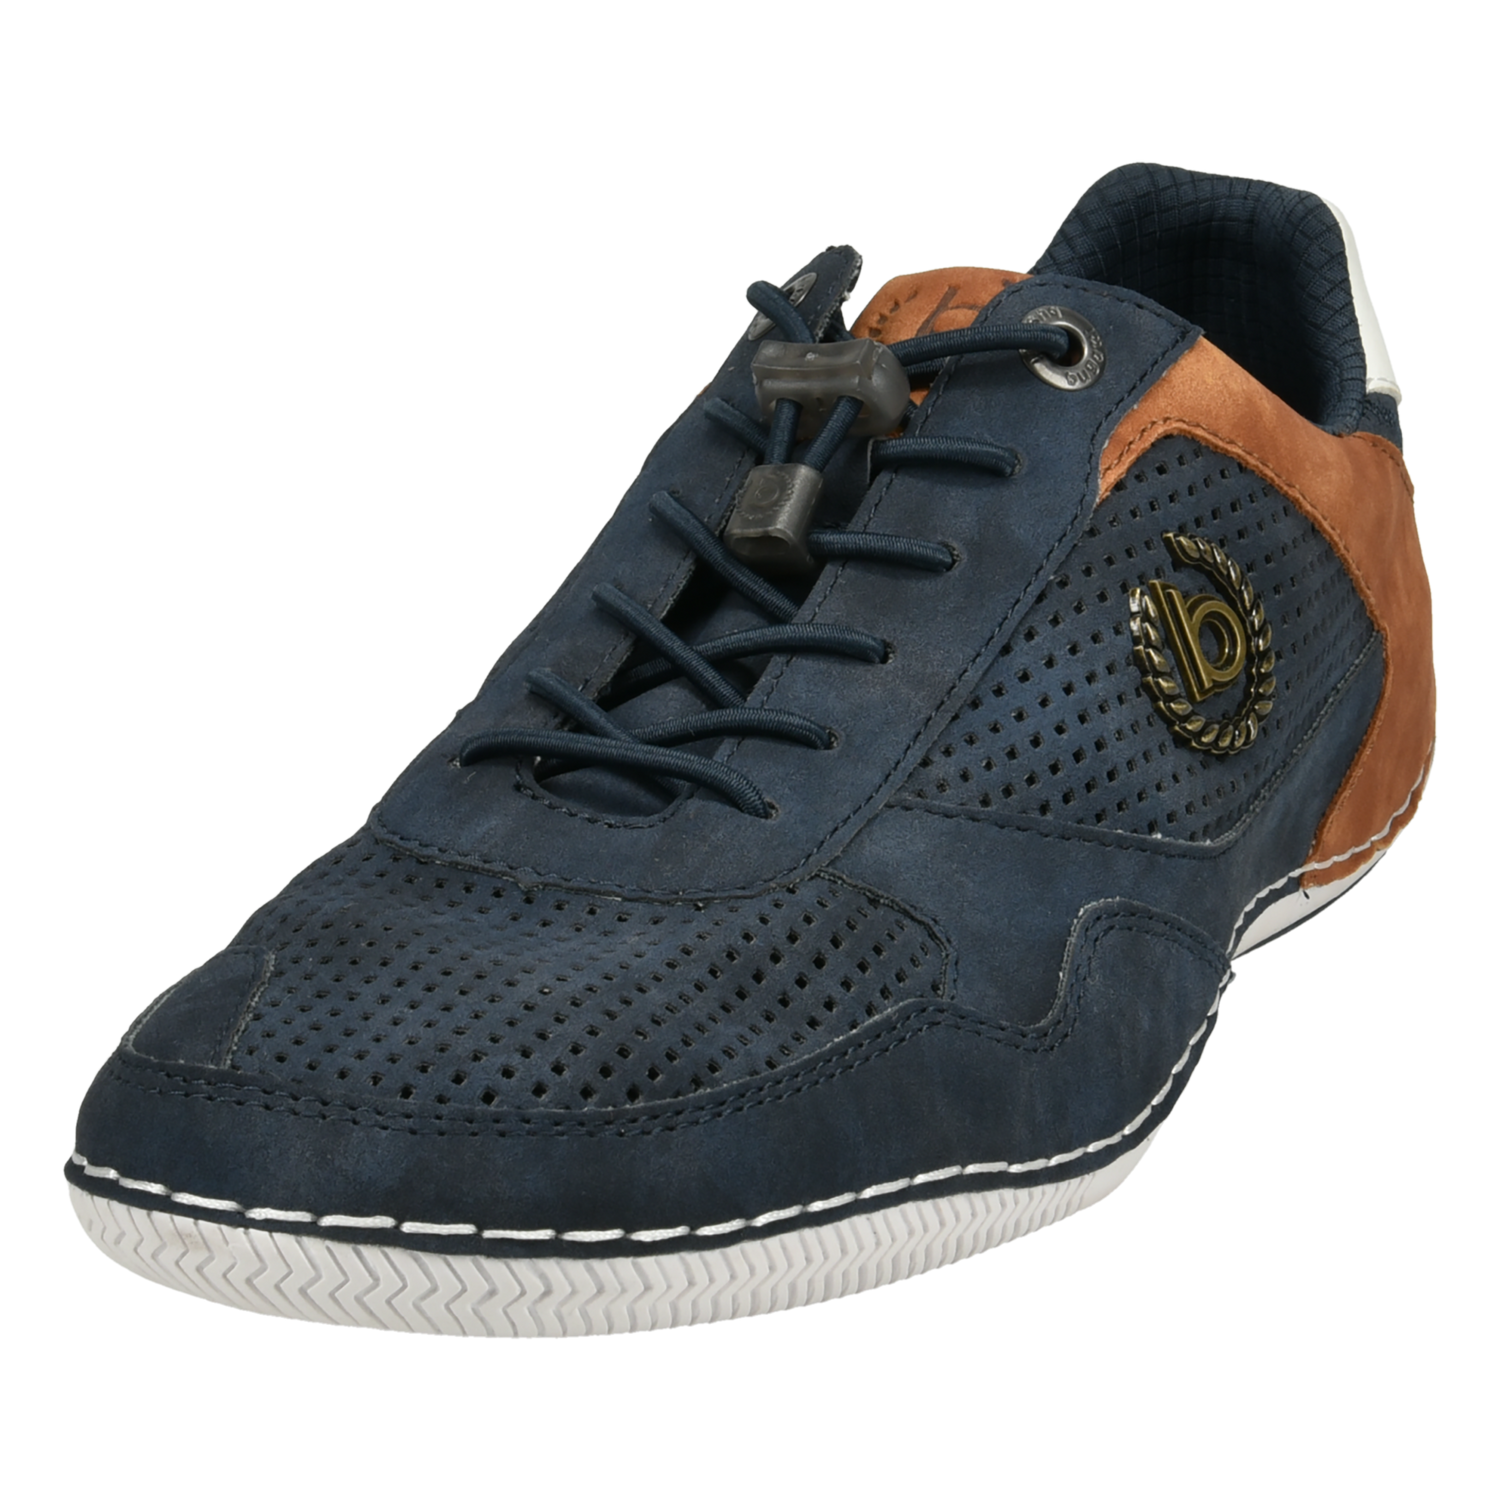     Front view of Bugatti dark blue casual sneakers showing the perforated synthetic upper.